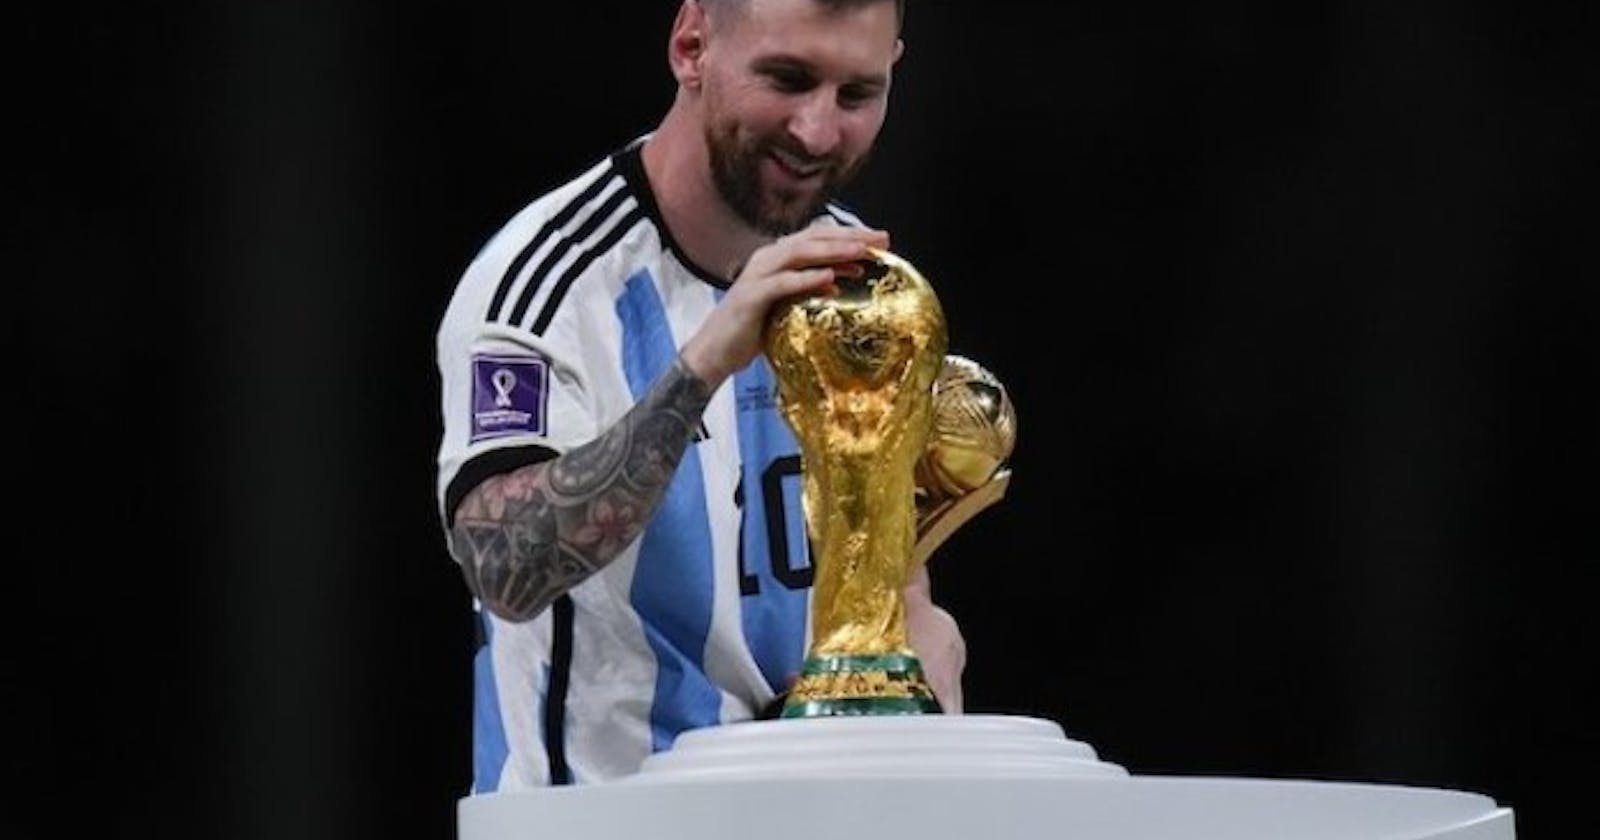 Argentina Wins 2022 World Cup, Lionel Messi's Status: Greatest of All Time!